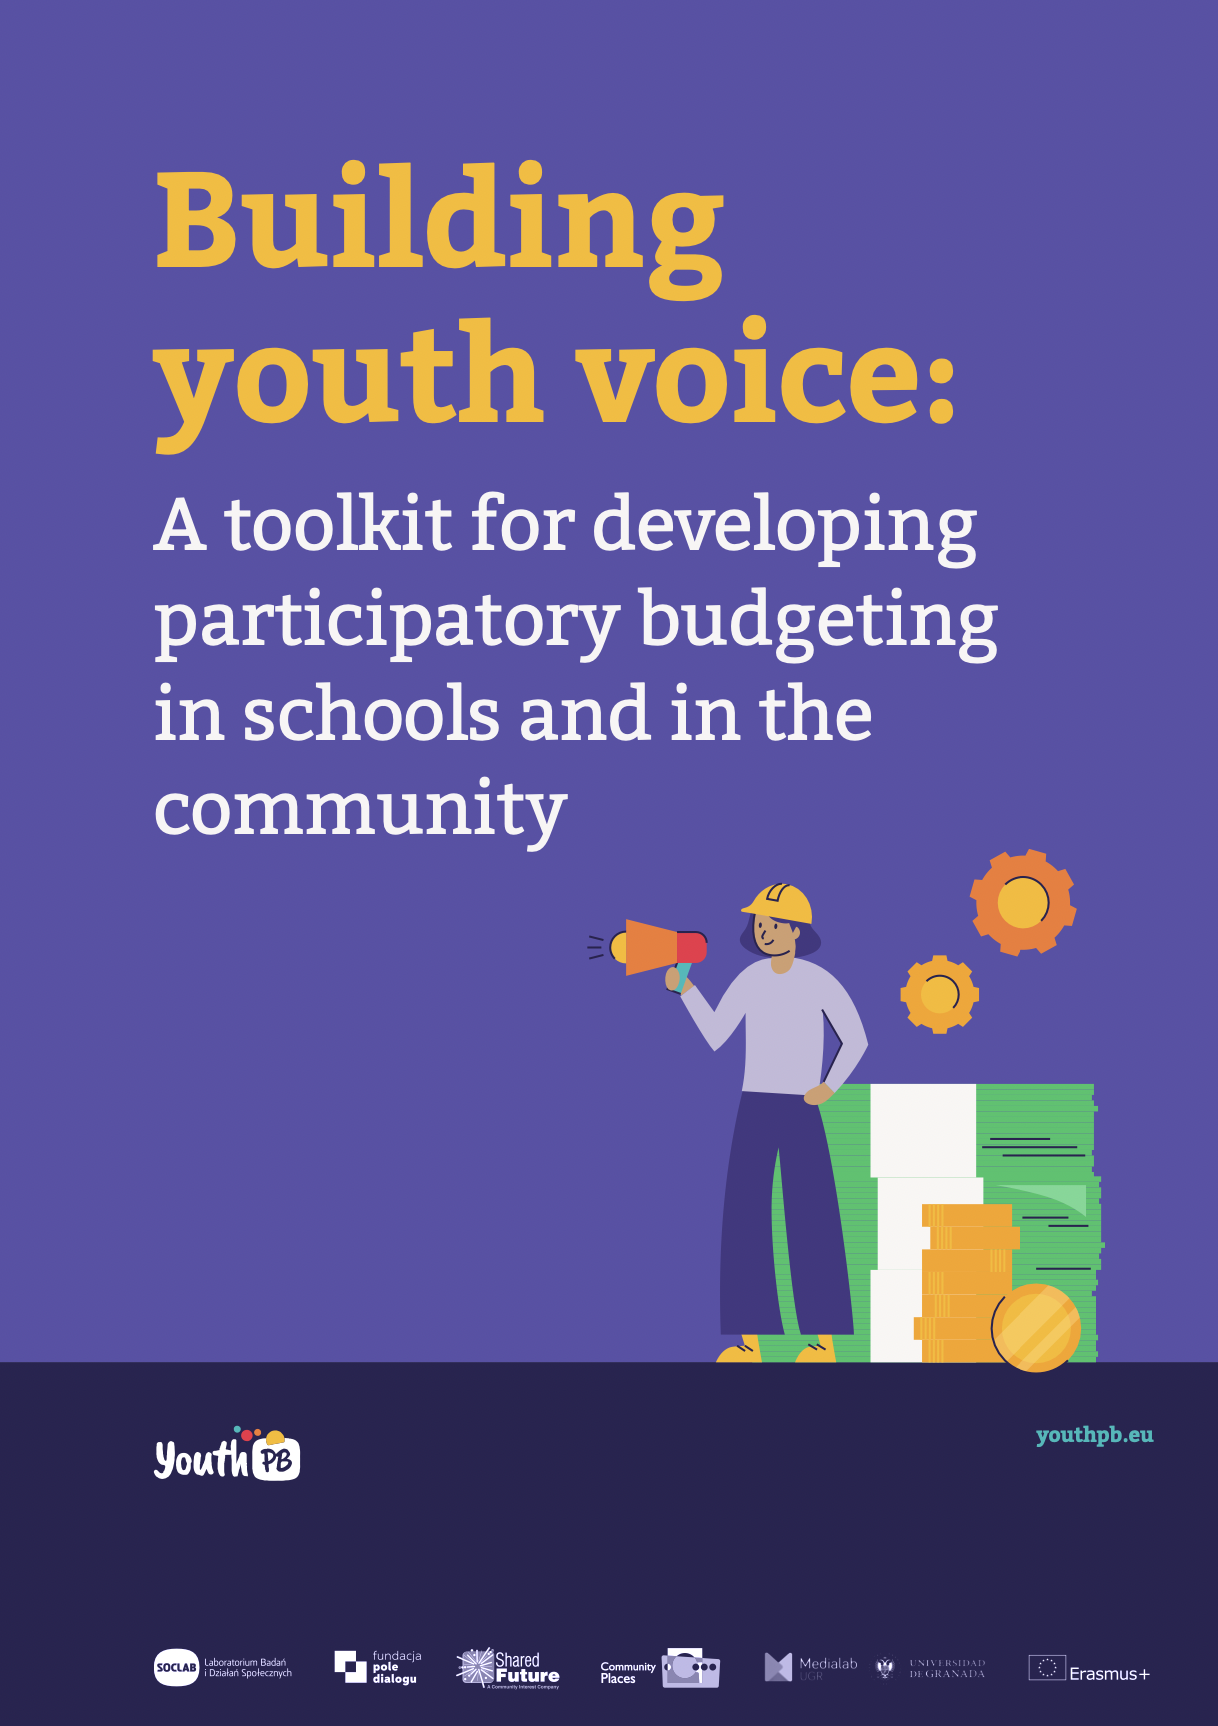 Building Youth Voice: A Toolkit for Developing Participatory Budgeting in Schools and in the Community